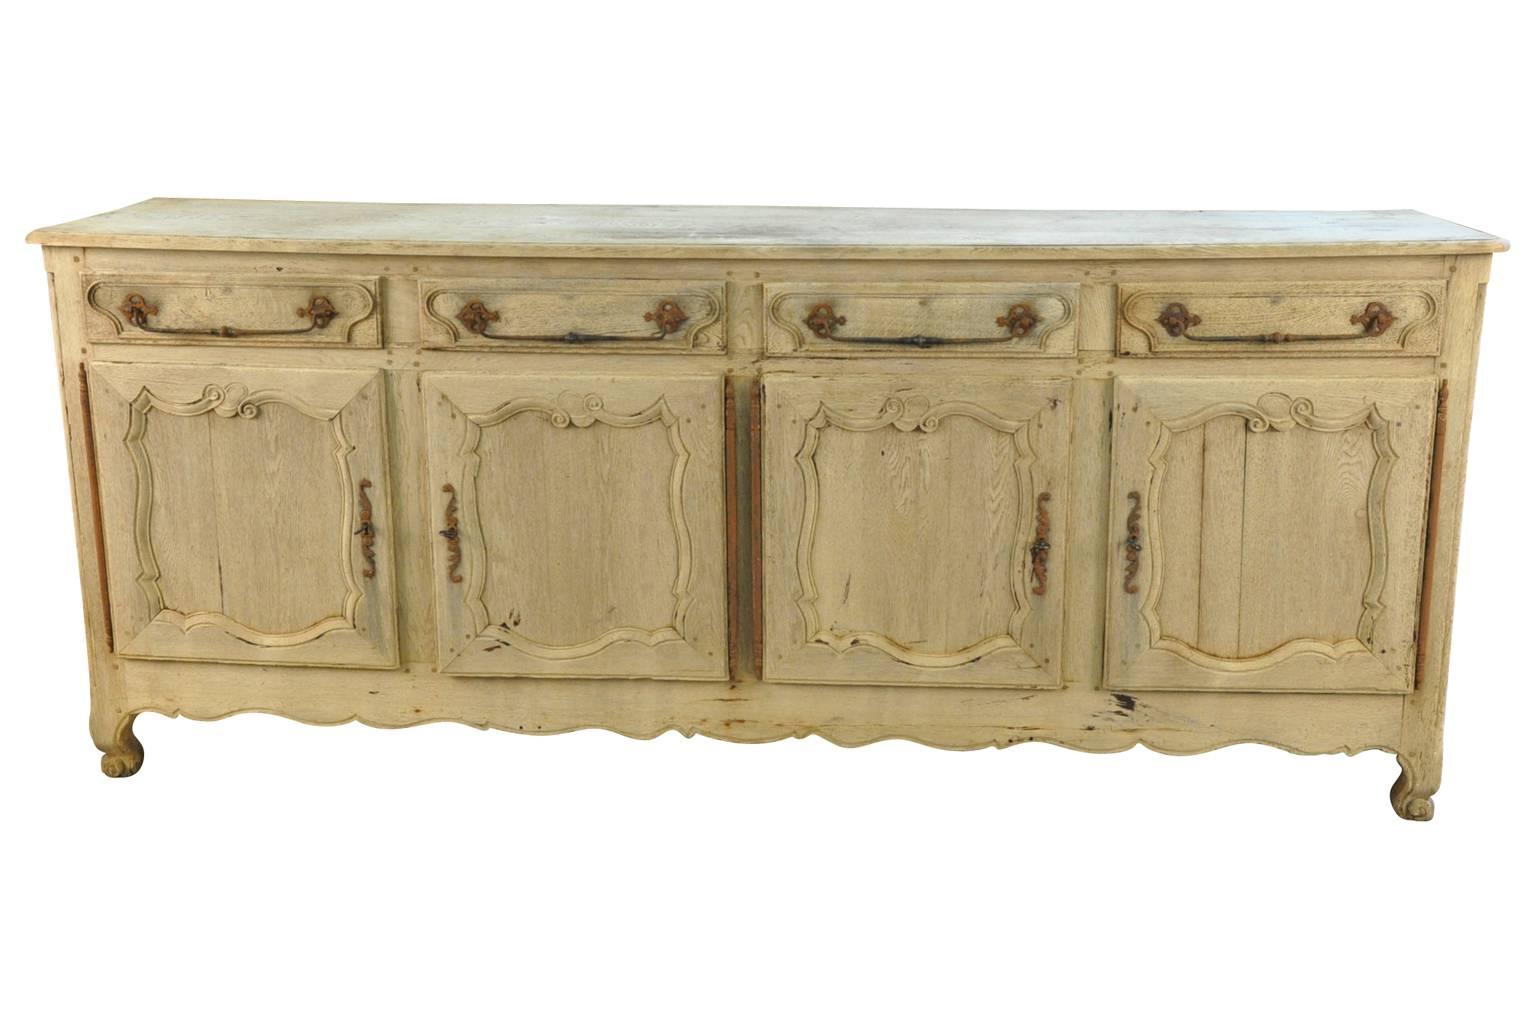 A very lovely mid-19th century enfilade or buffet from the Provence region of France. Handsomely constructed from washed or bleached oak. Wonderful hardware.